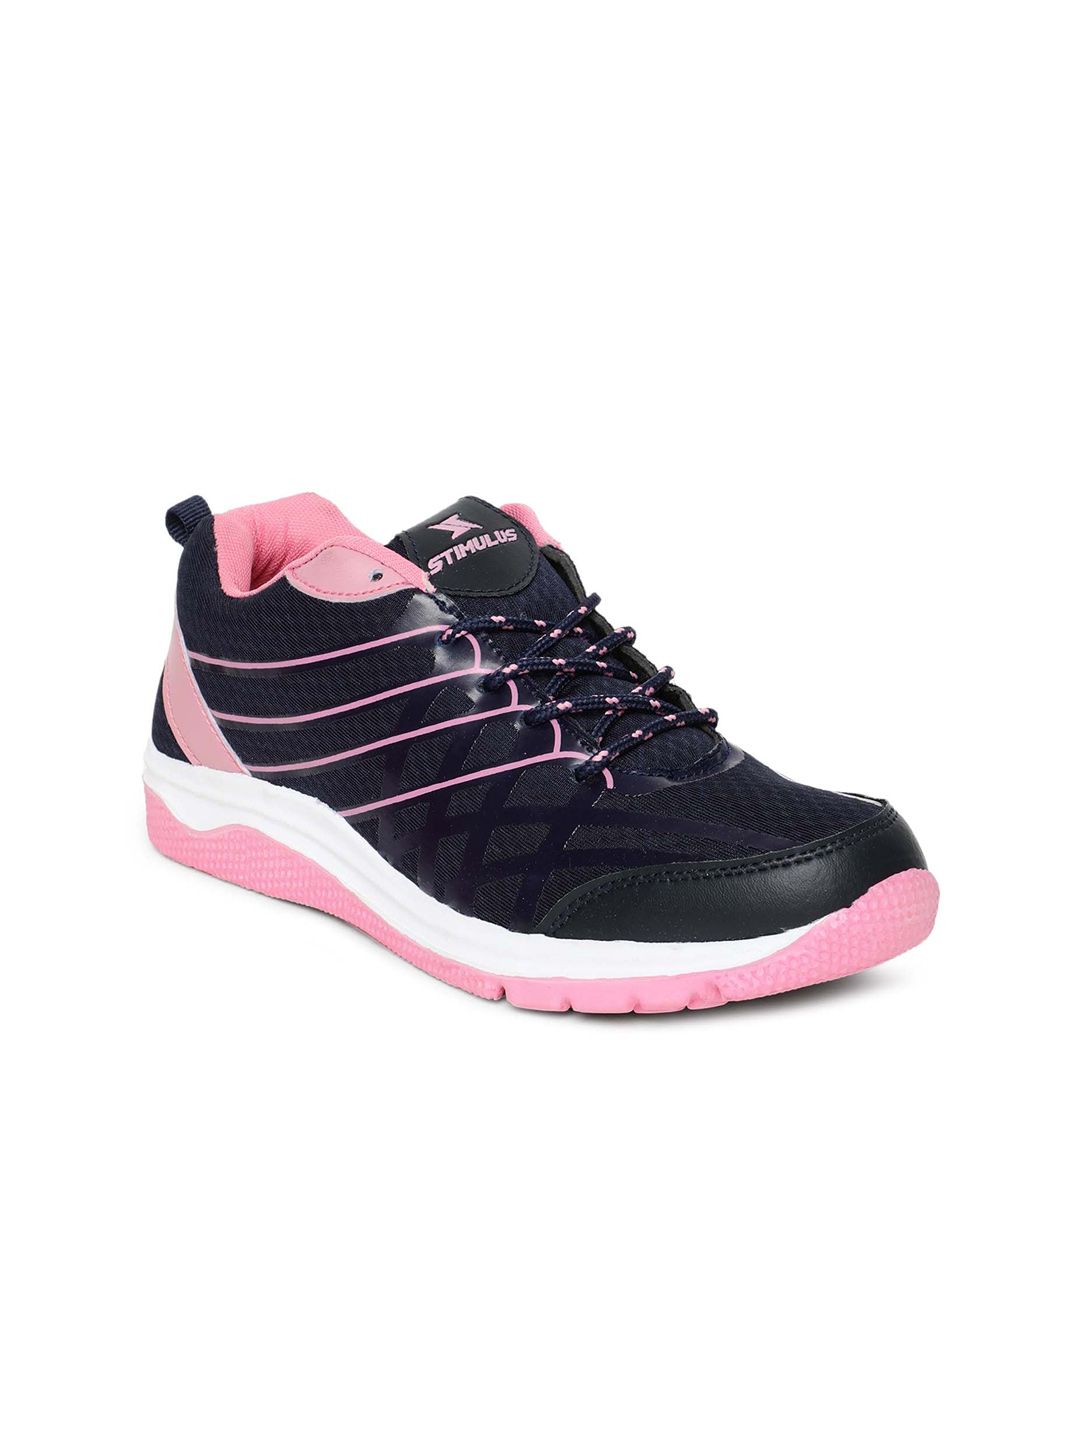 Paragon Women Colourblocked Sneakers Price in India